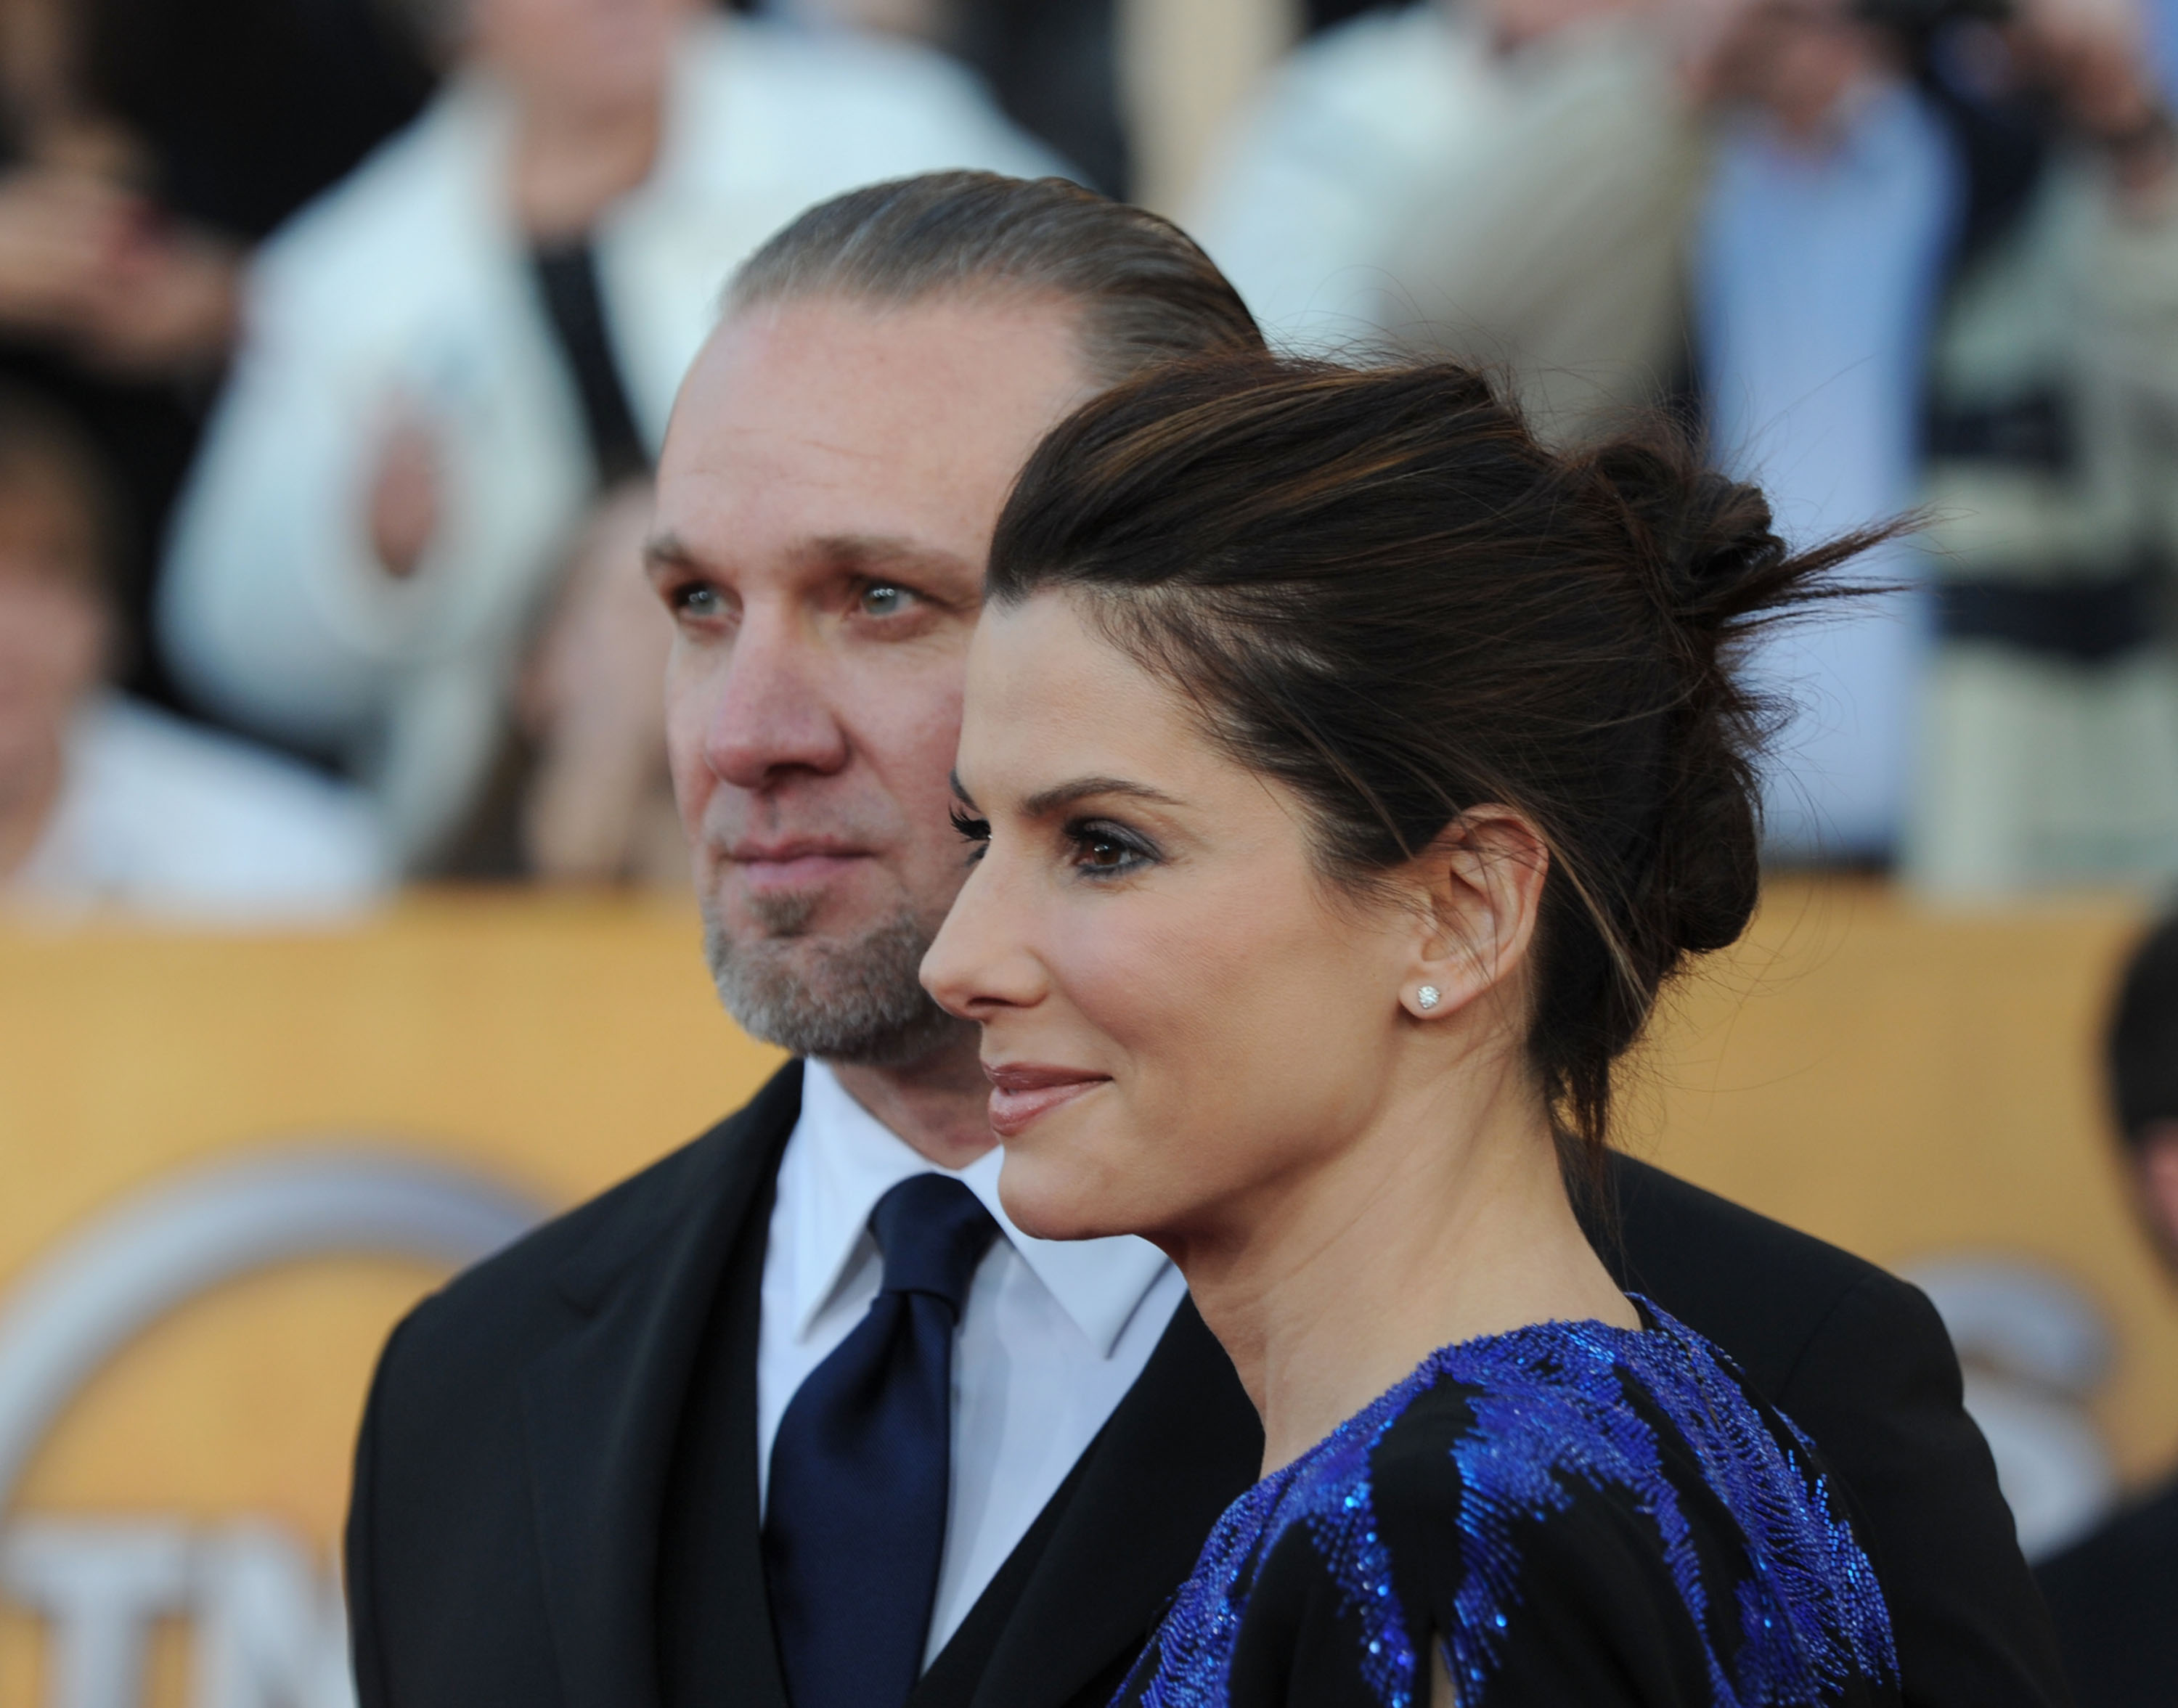 Jesse James and Sandra Bullock at the 16th Annual Screen Actors Guild Awards in Los Angeles, California on January 23, 2010 | Source: Getty Images